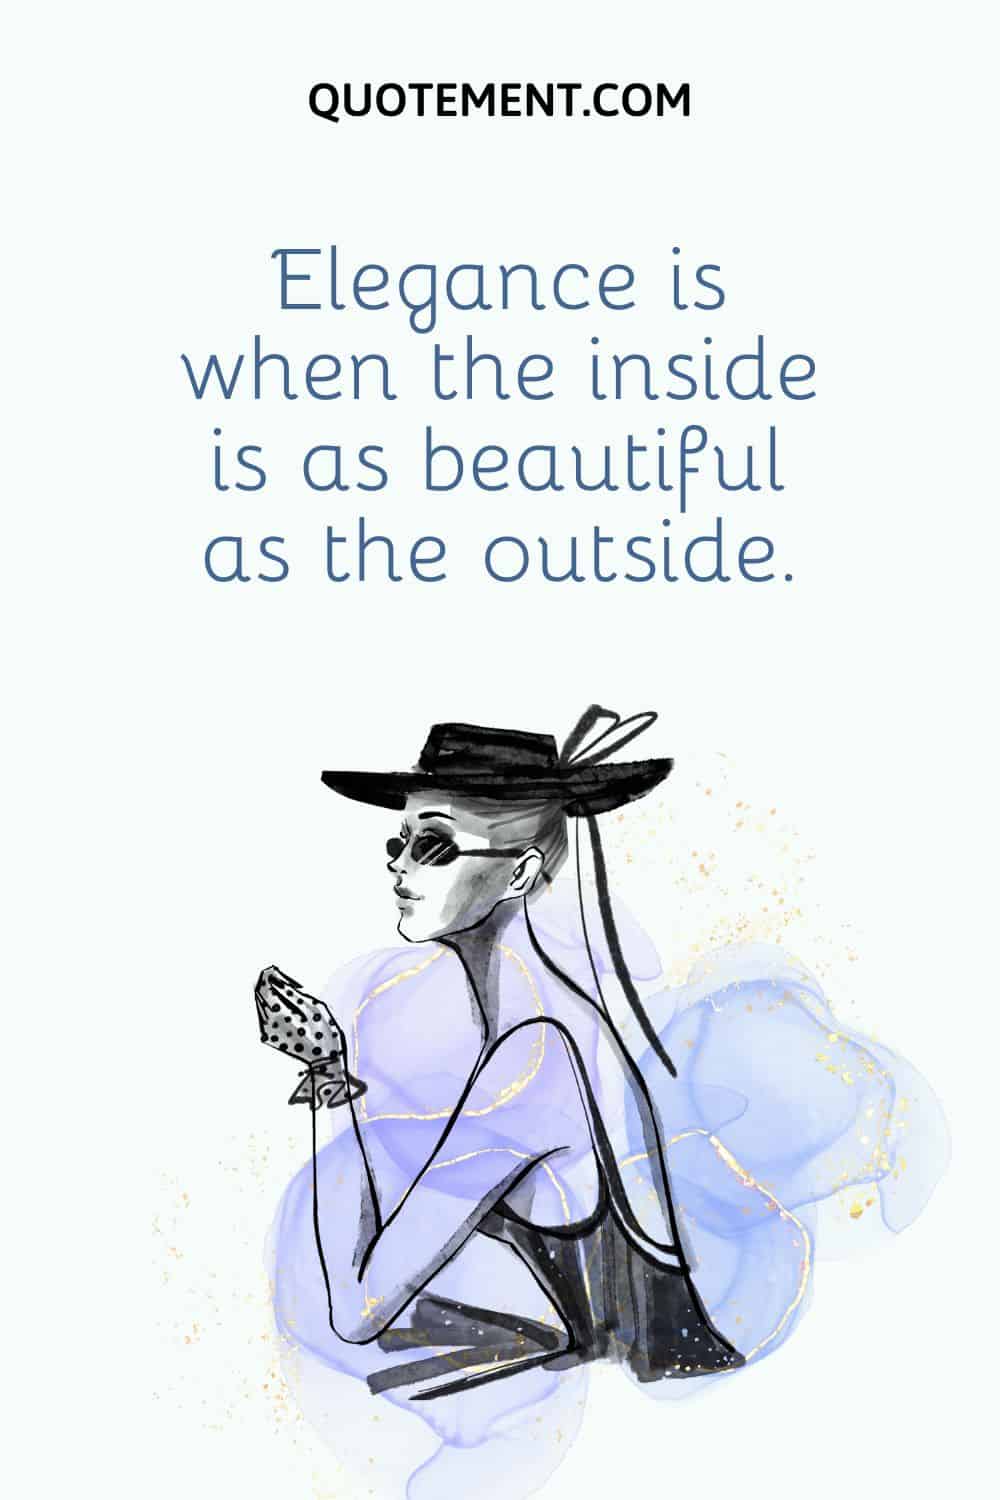 an elegant lady wearing a hat and sunglasses image representing classy Instagram caption